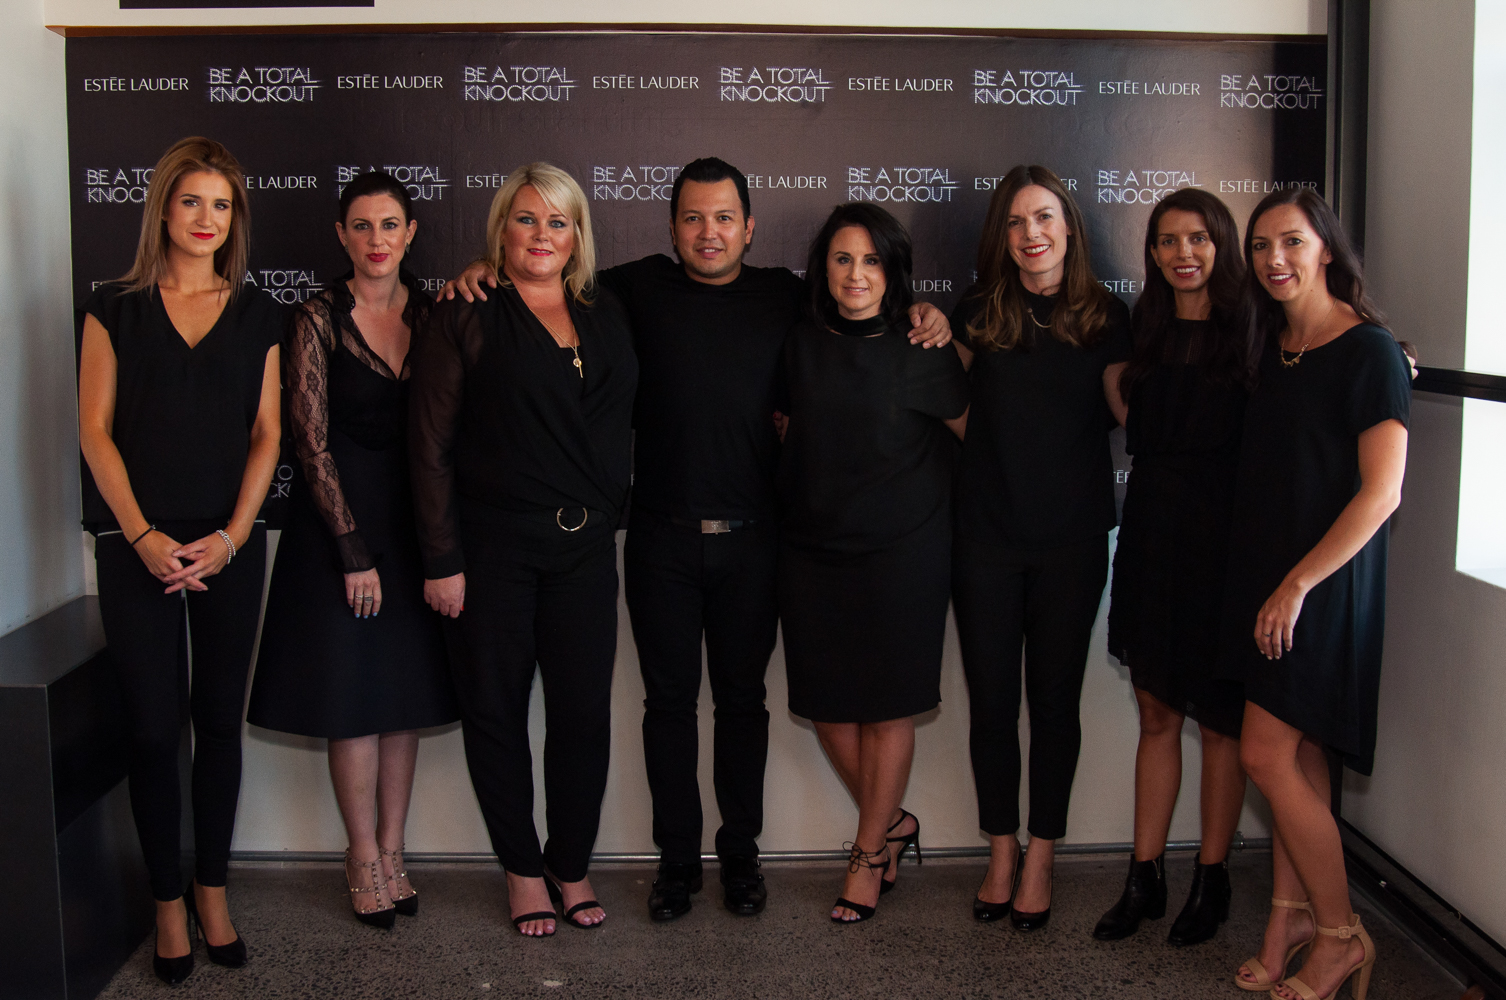 The Estée Lauder team with Victor Henao (center) and Fashion Quaterly editor Sally-Ann Mullin (second left).